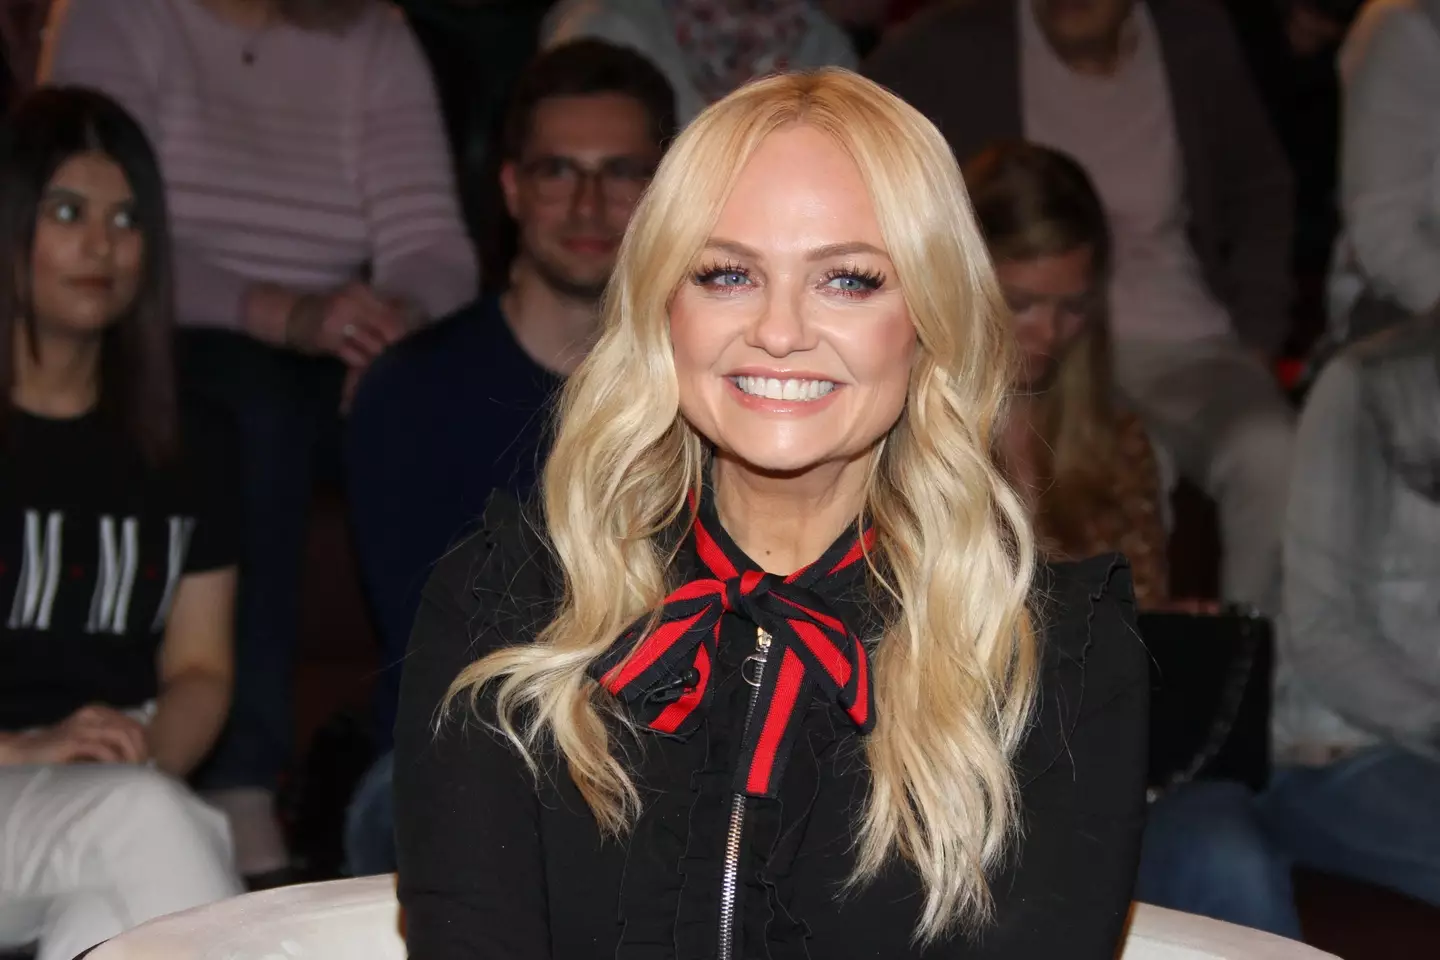 Holly Willoughby called out Emma Bunton for a fight.